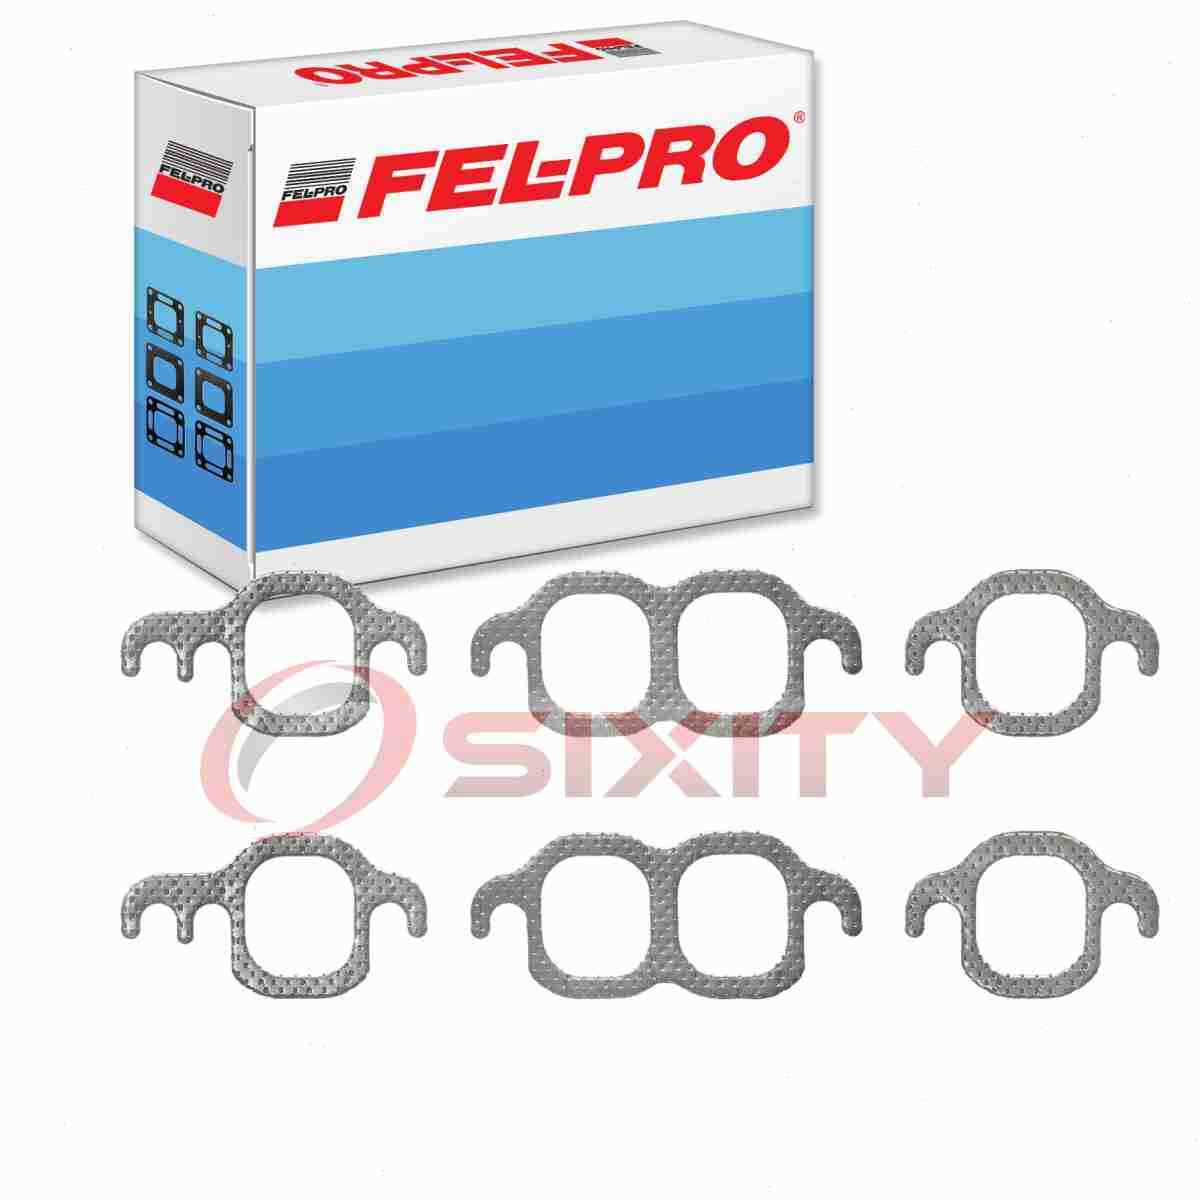 Fel-Pro Exhaust Manifold Gasket Set for 1955-1957 Chevrolet Two-Ten Series qh